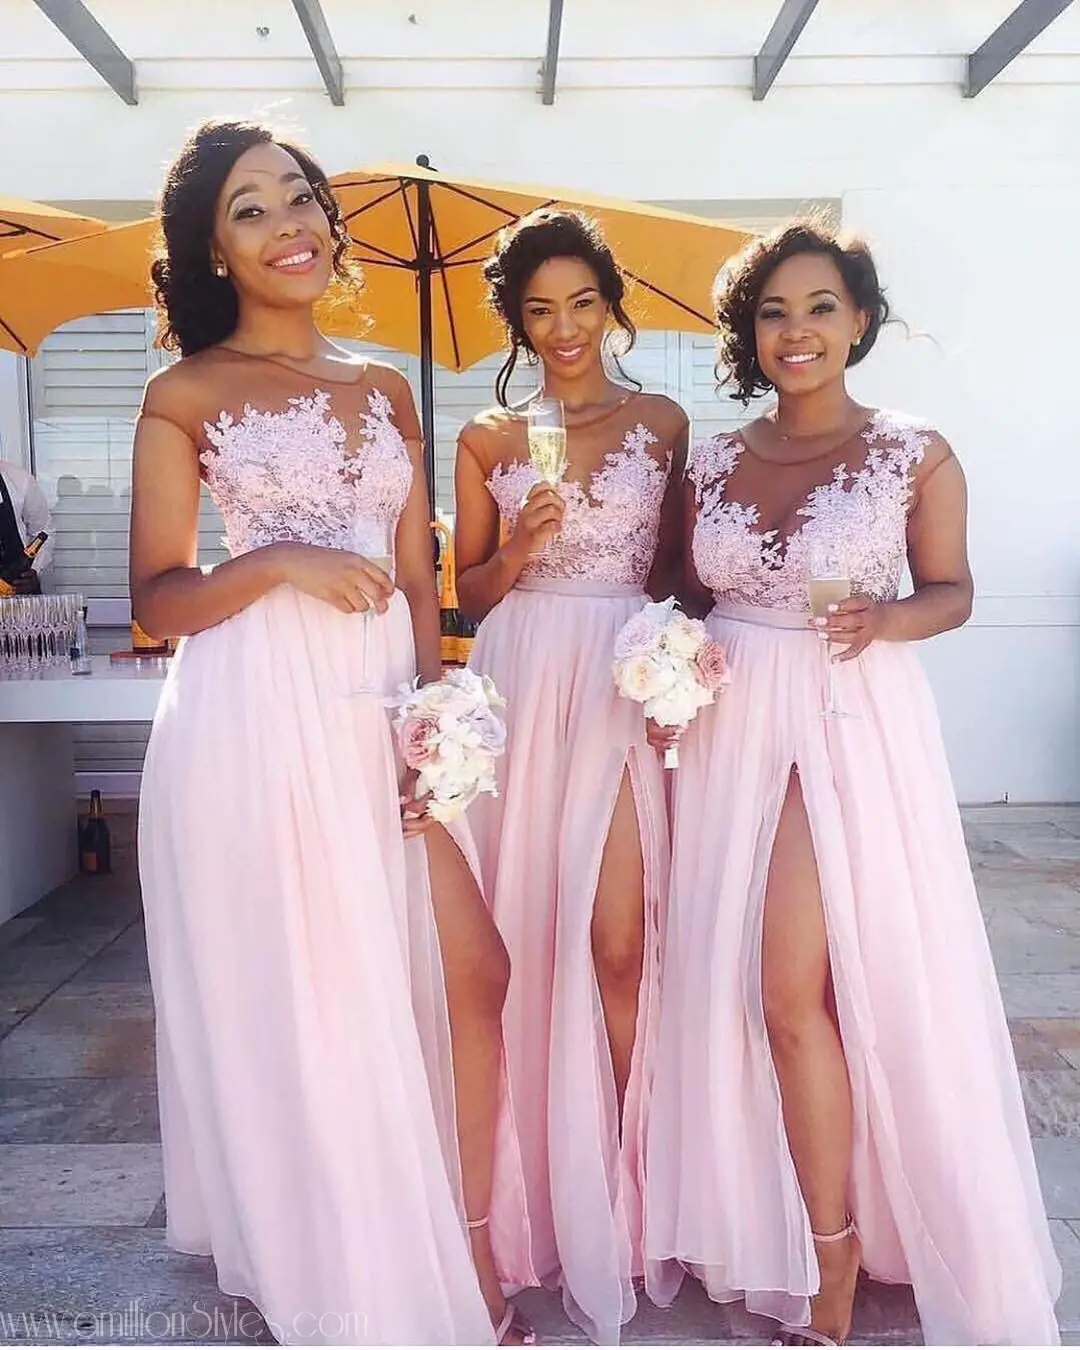 10 Bridesmaids Styles For Your Favorite Girls